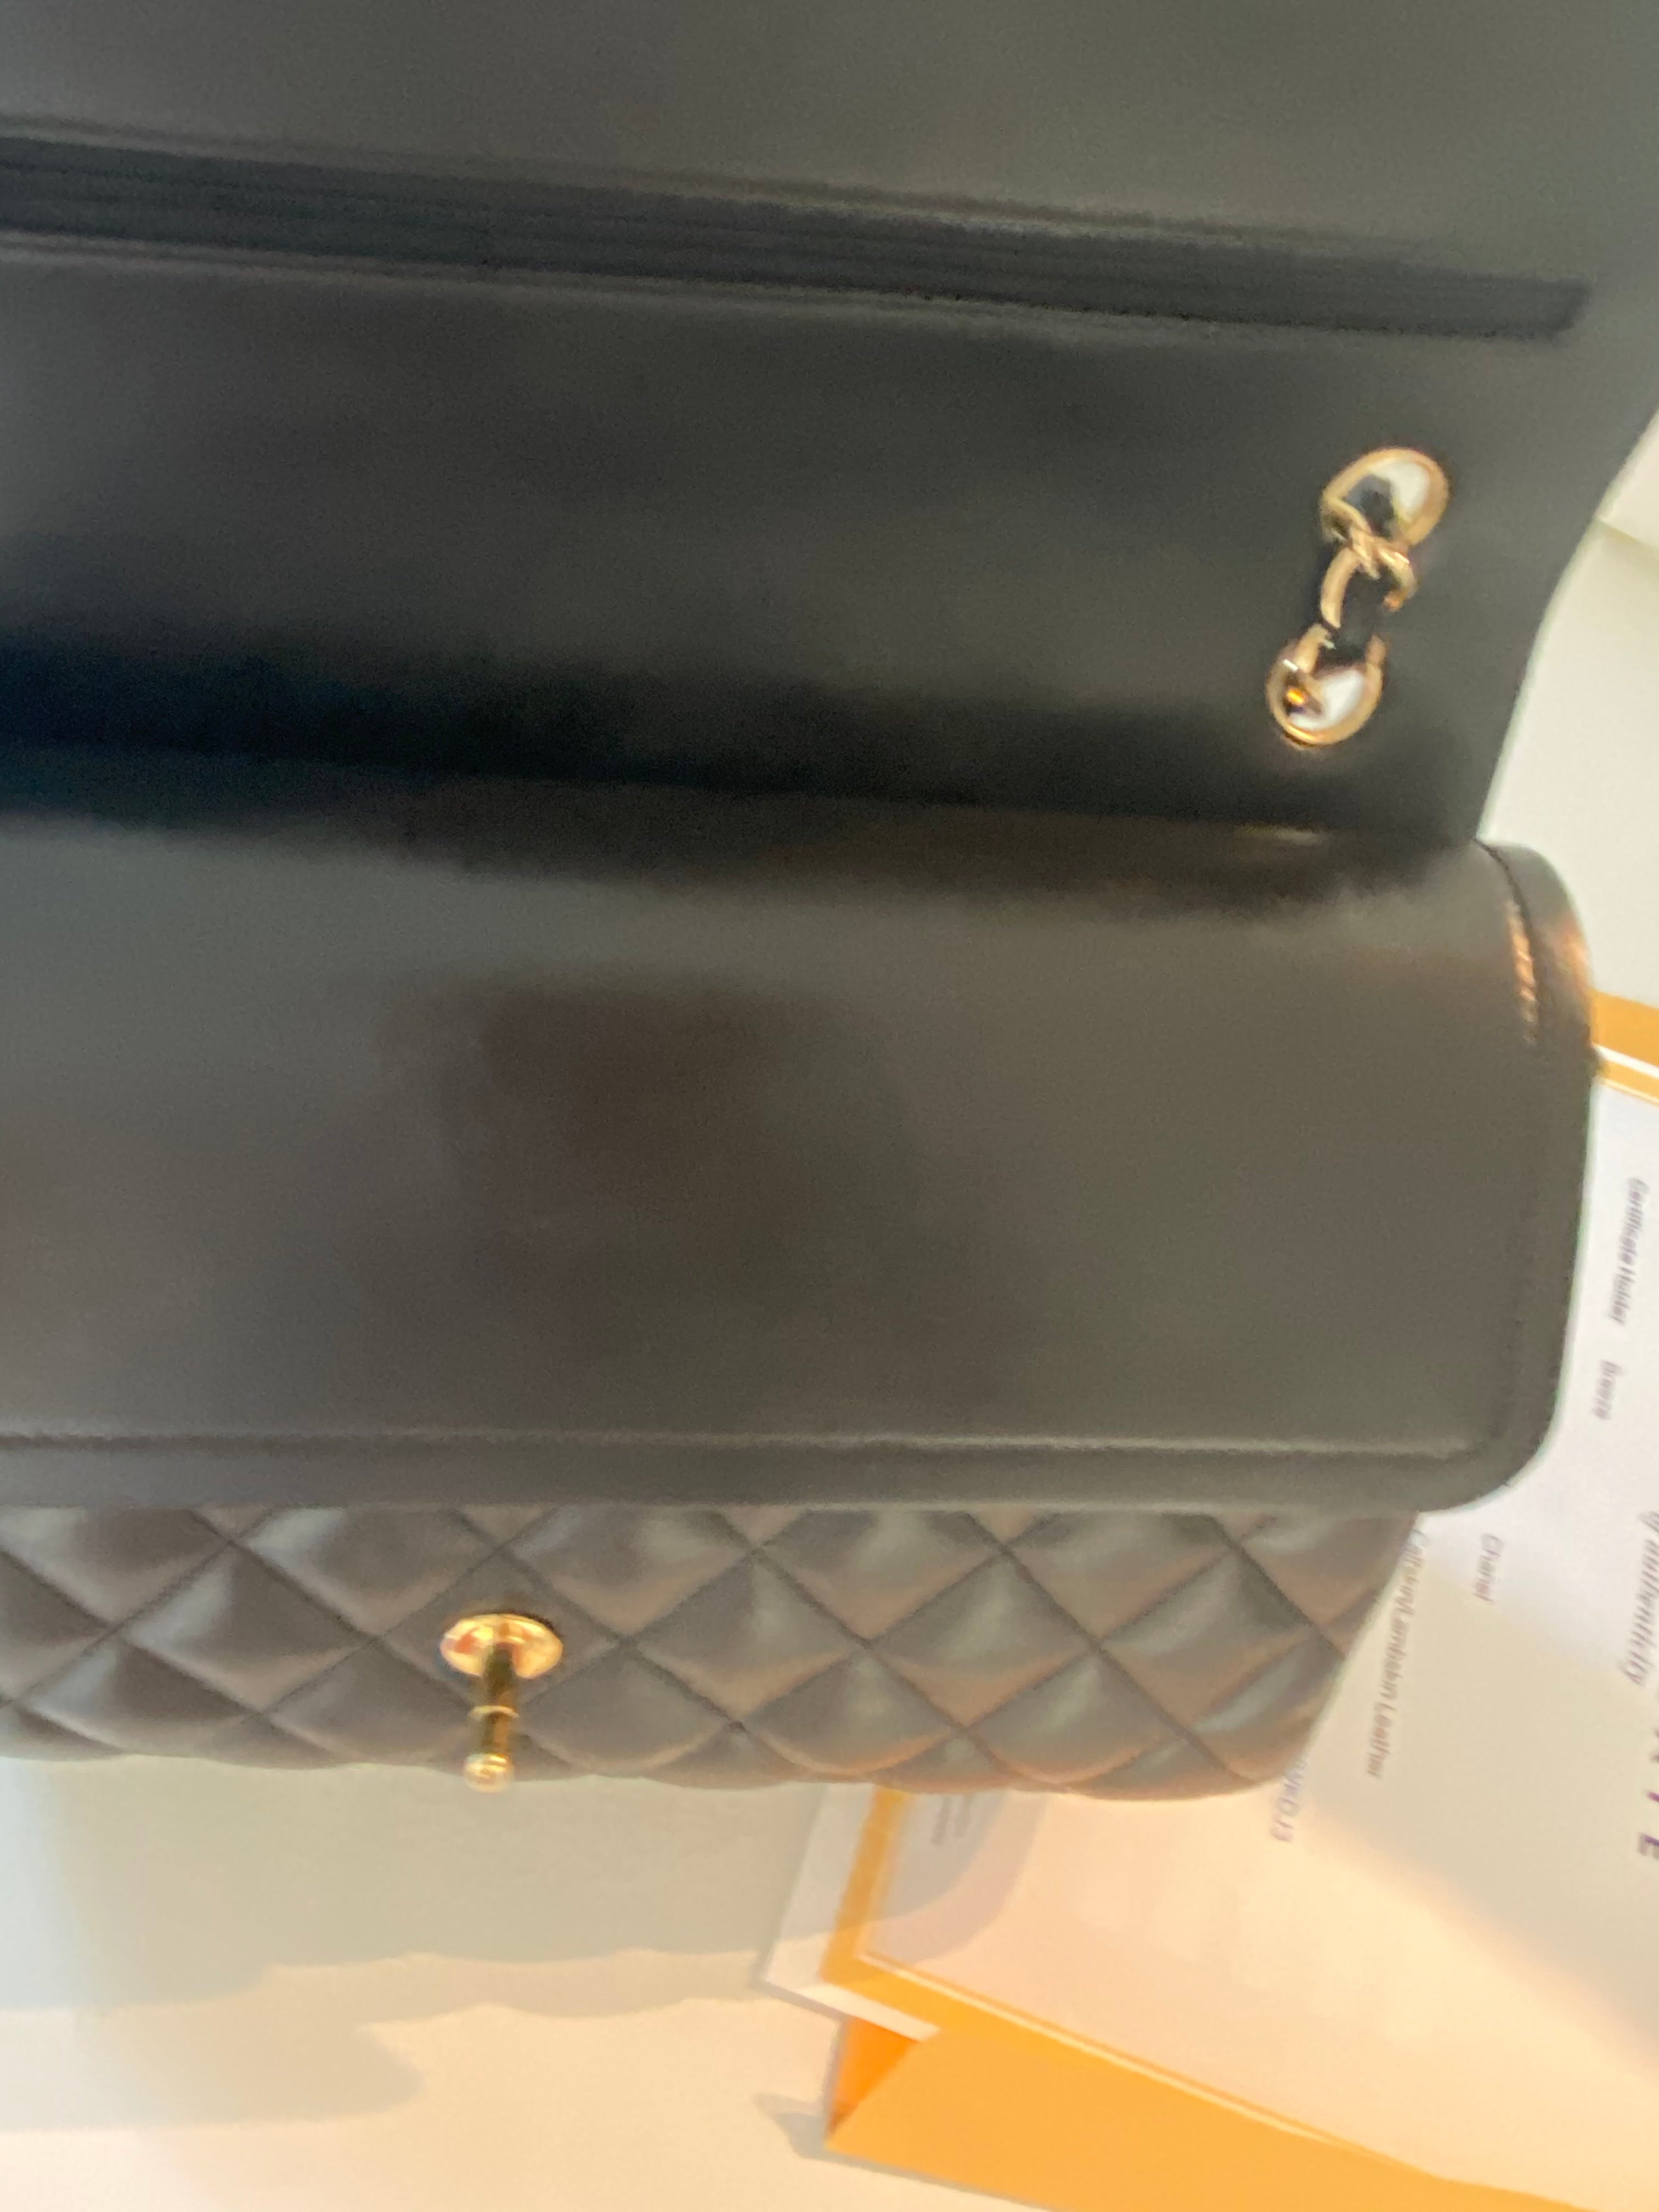 Chanel classic flap – Beccas Bags